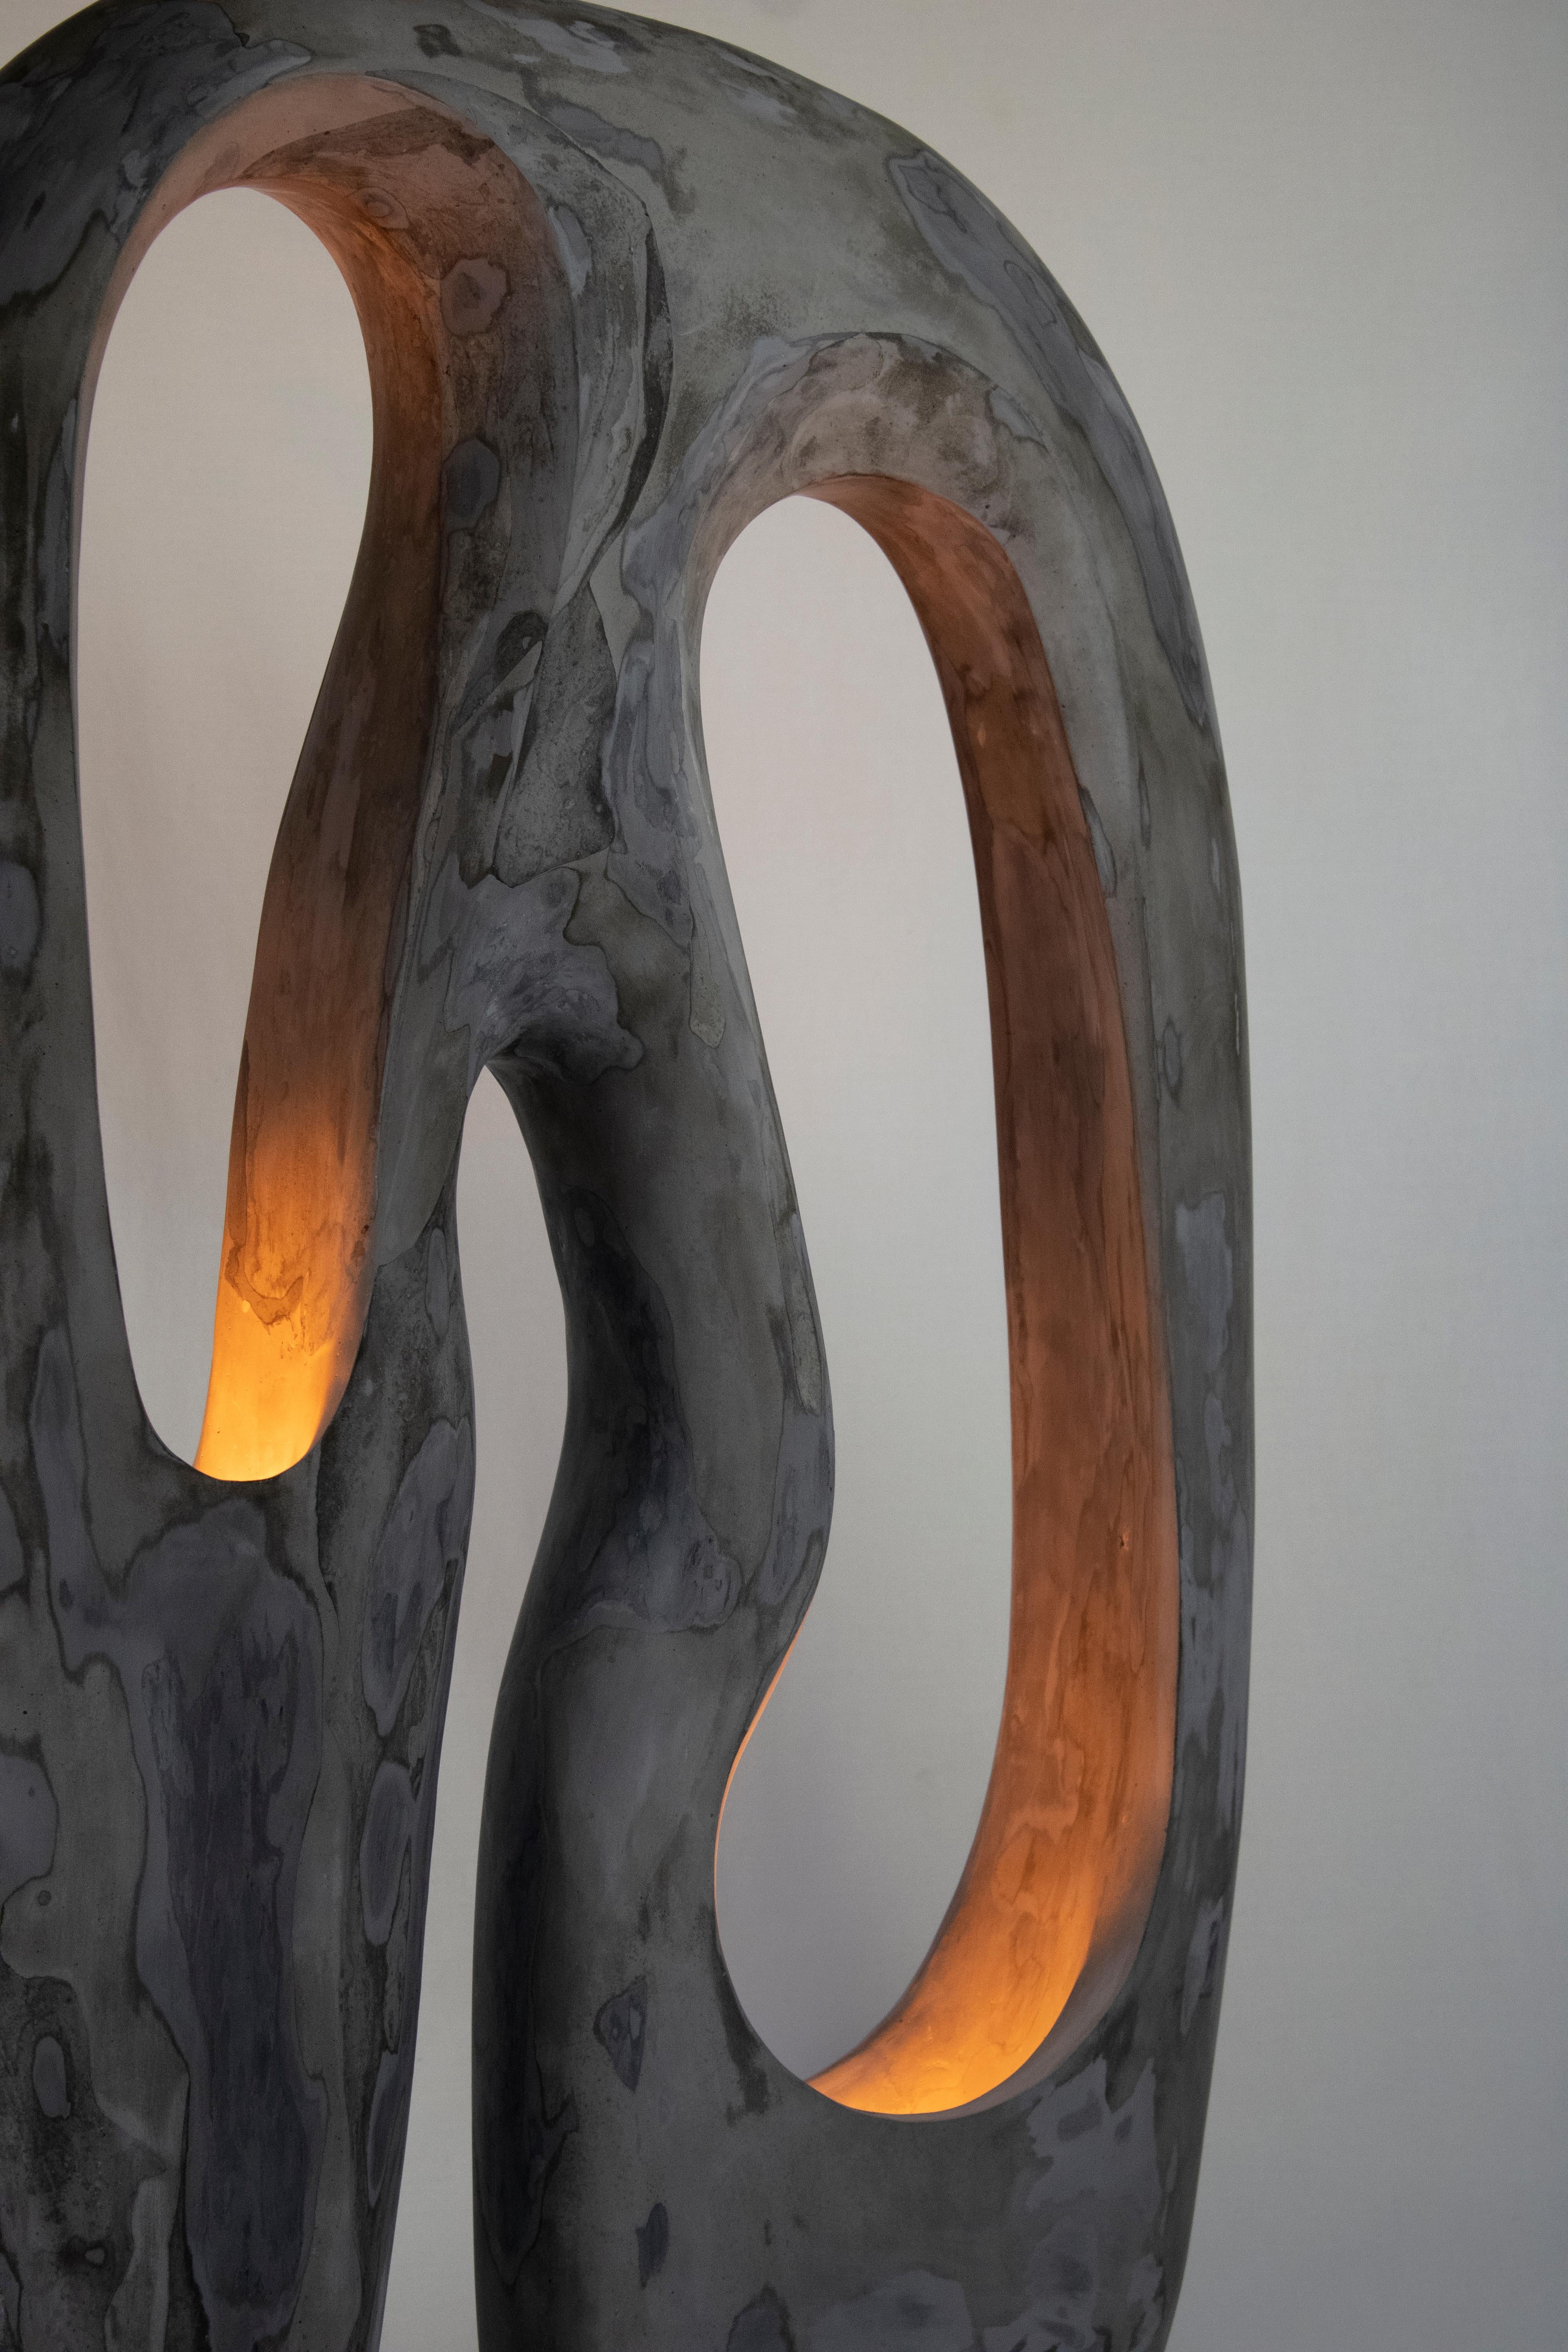 The Longing Lamp is a contemporary handmade sculptural gypsum lamp part of the Living Forms collection. The lamp is cast in gypsum and carved by hand. The Longing Lamp stands out as a stunning blend of fine art and functional design. It's a part of